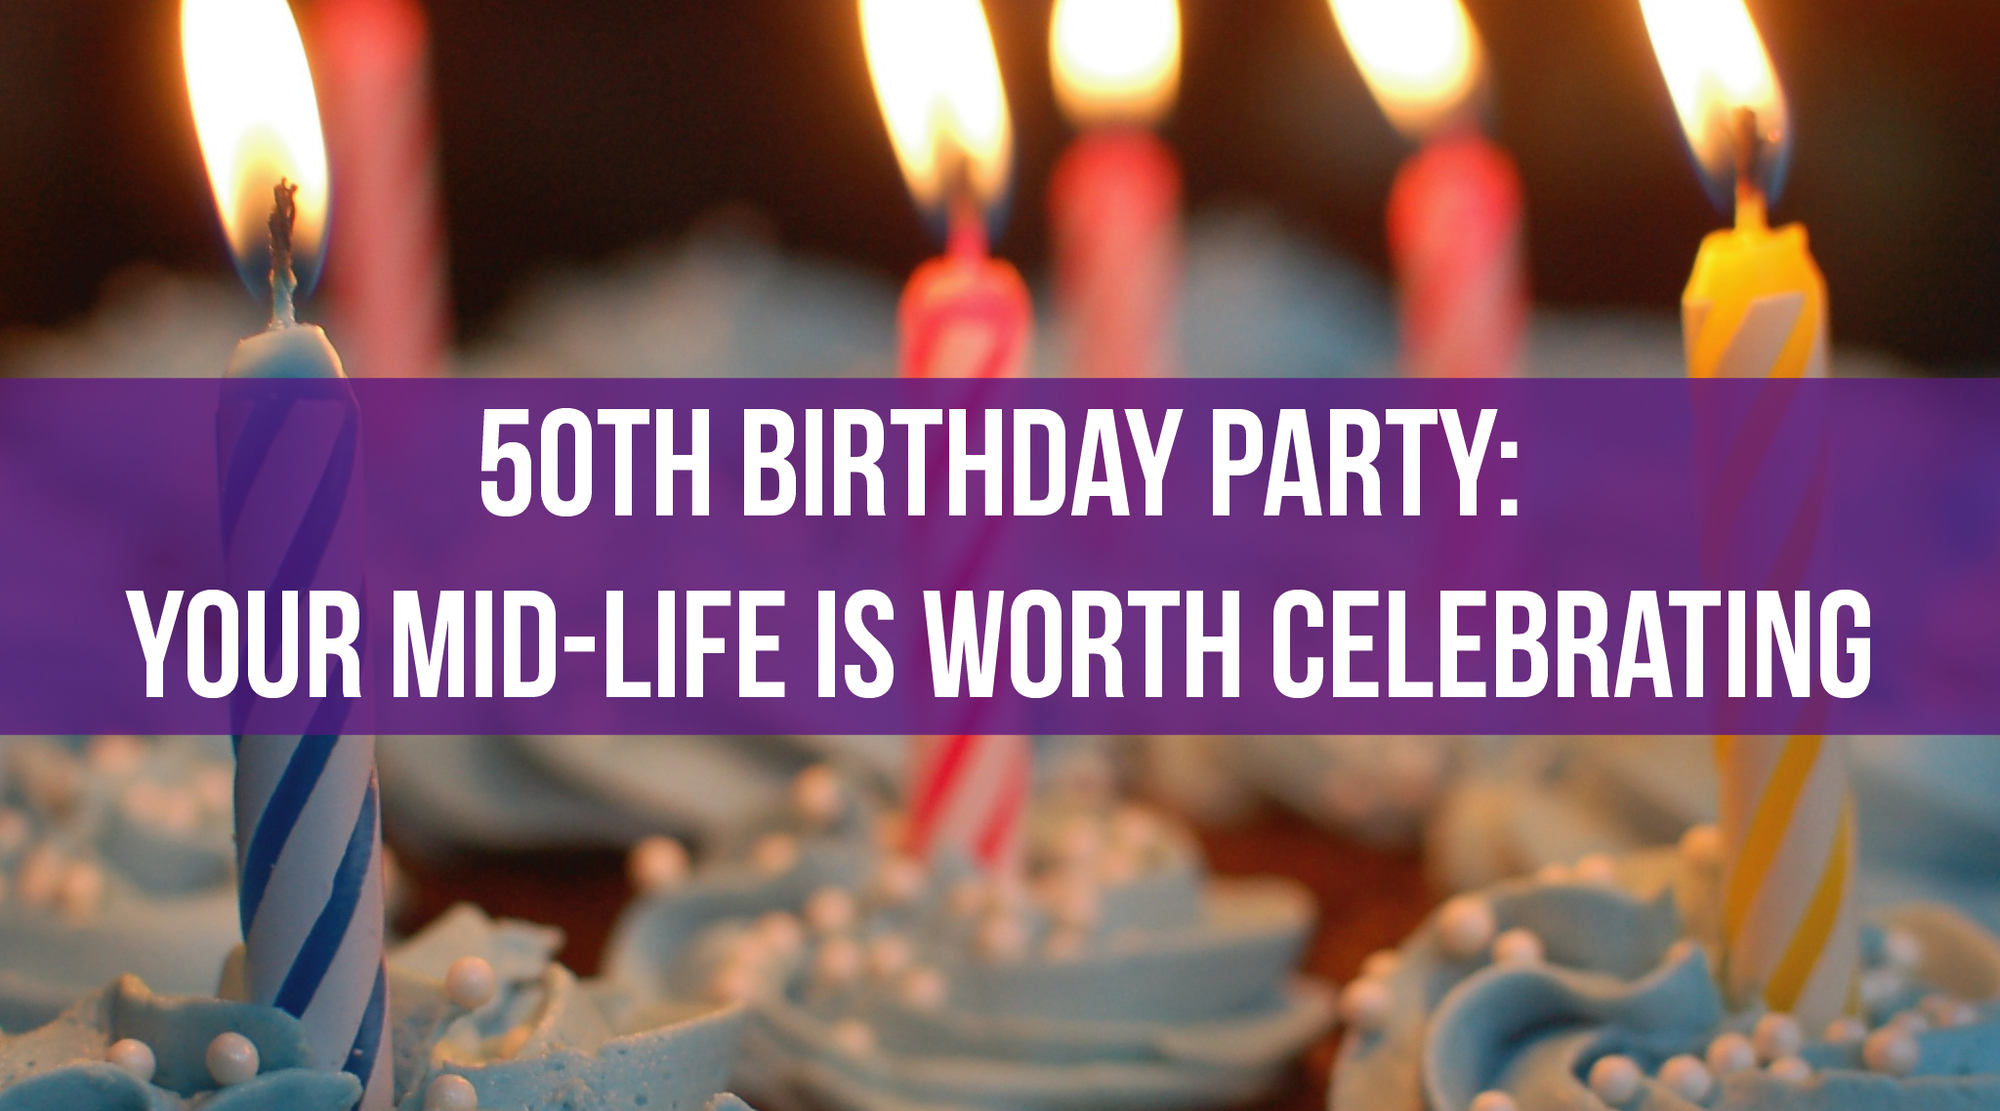 50th Birthday Party: Your Mid-Life is Worth Celebrating